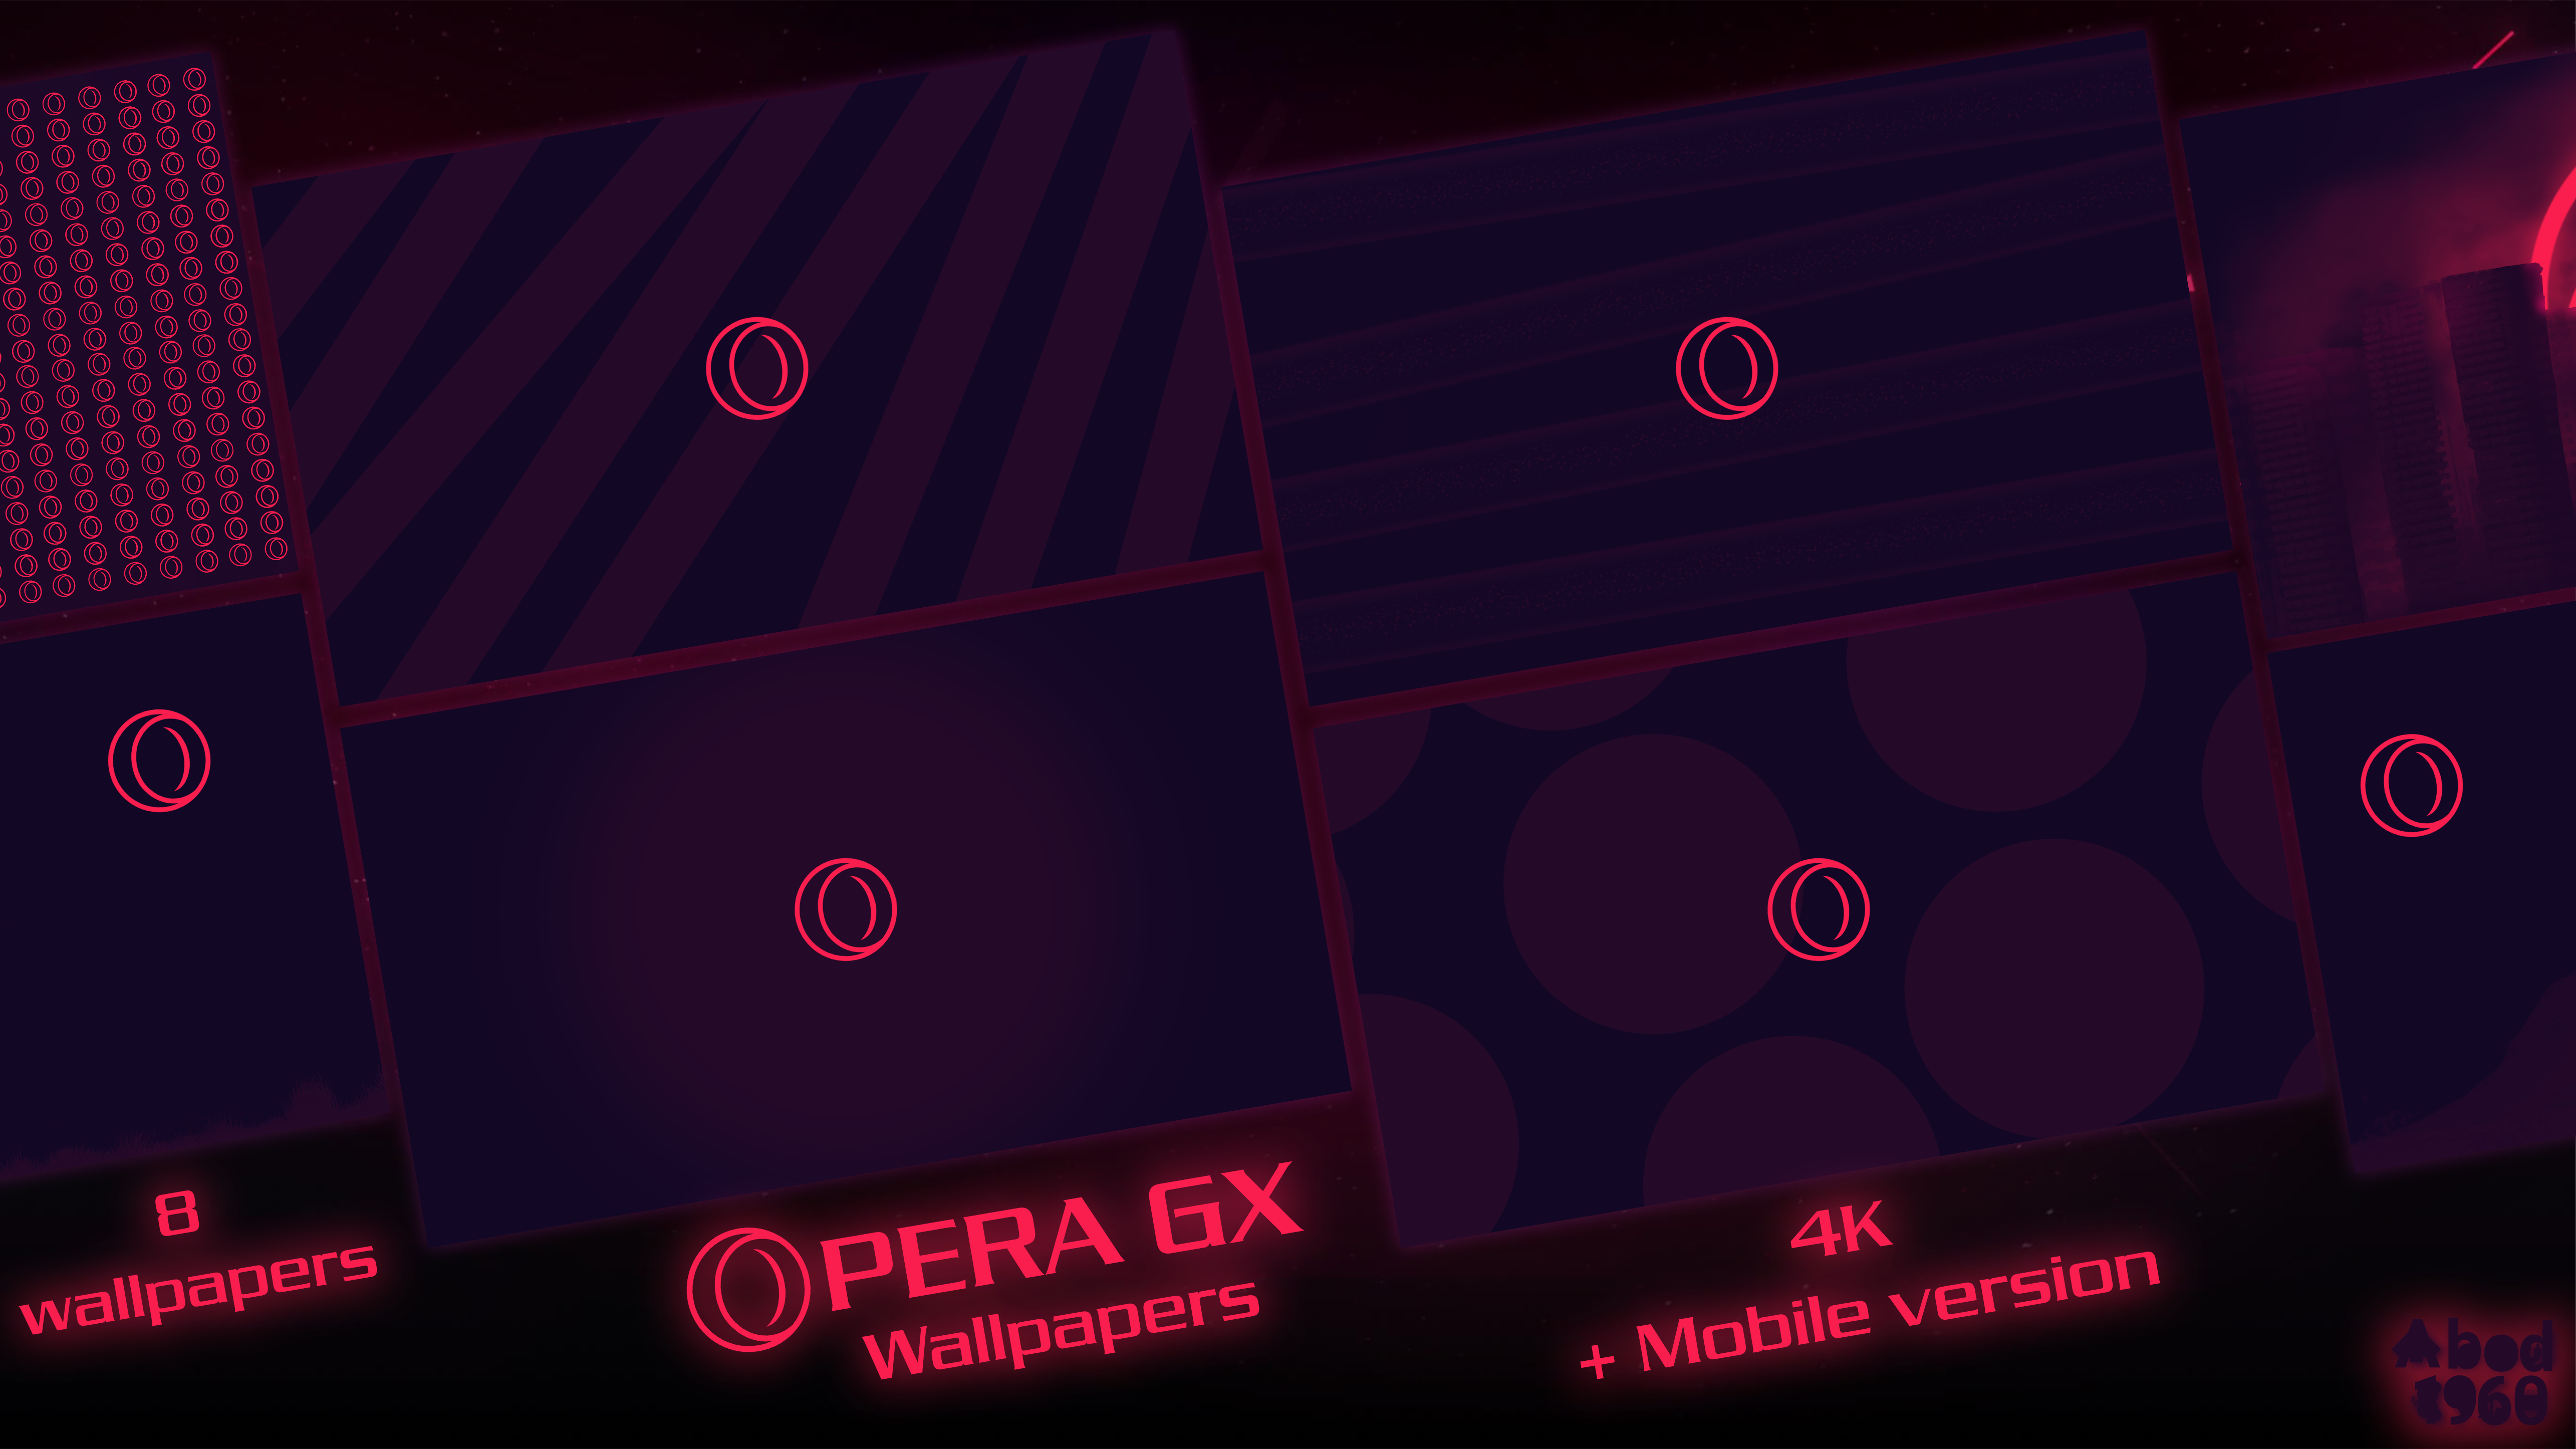 Opera gx wallpapers by abod on